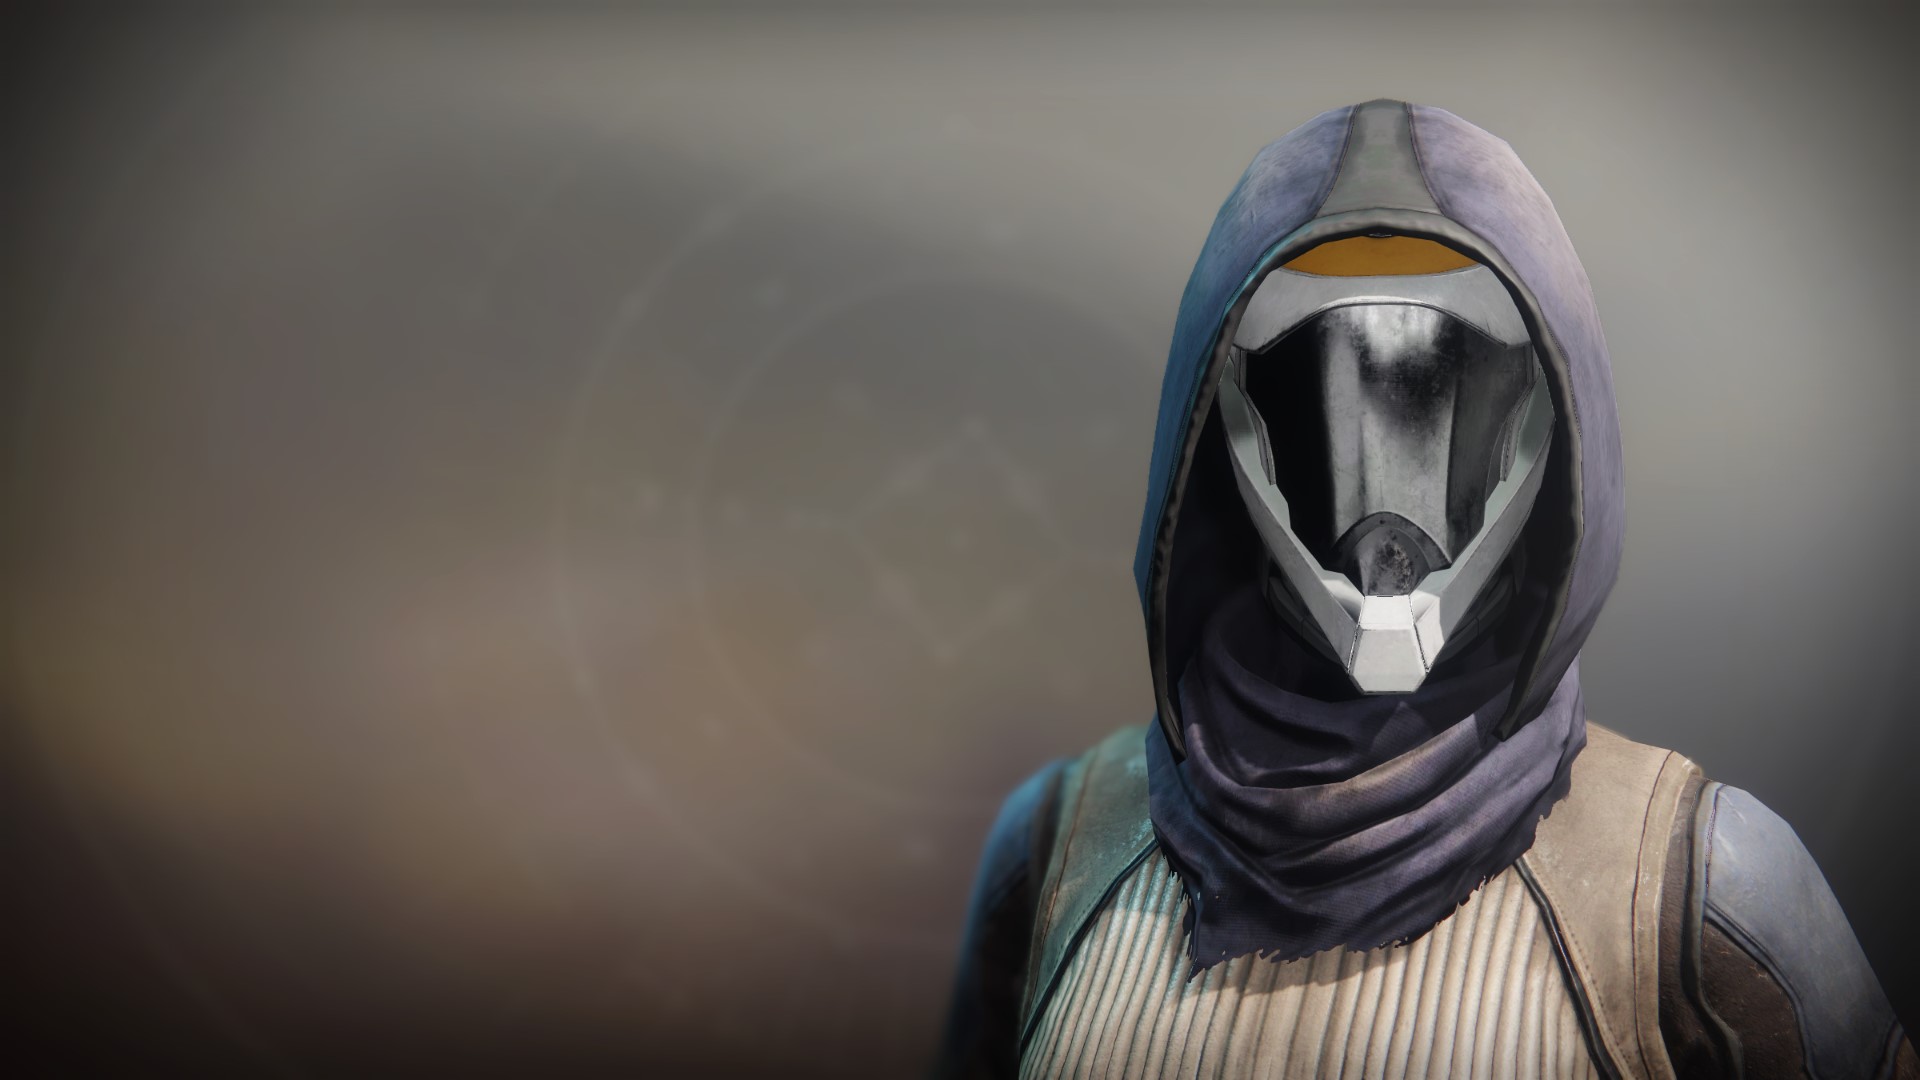 An in-game render of the Competitive Spirit Mask.